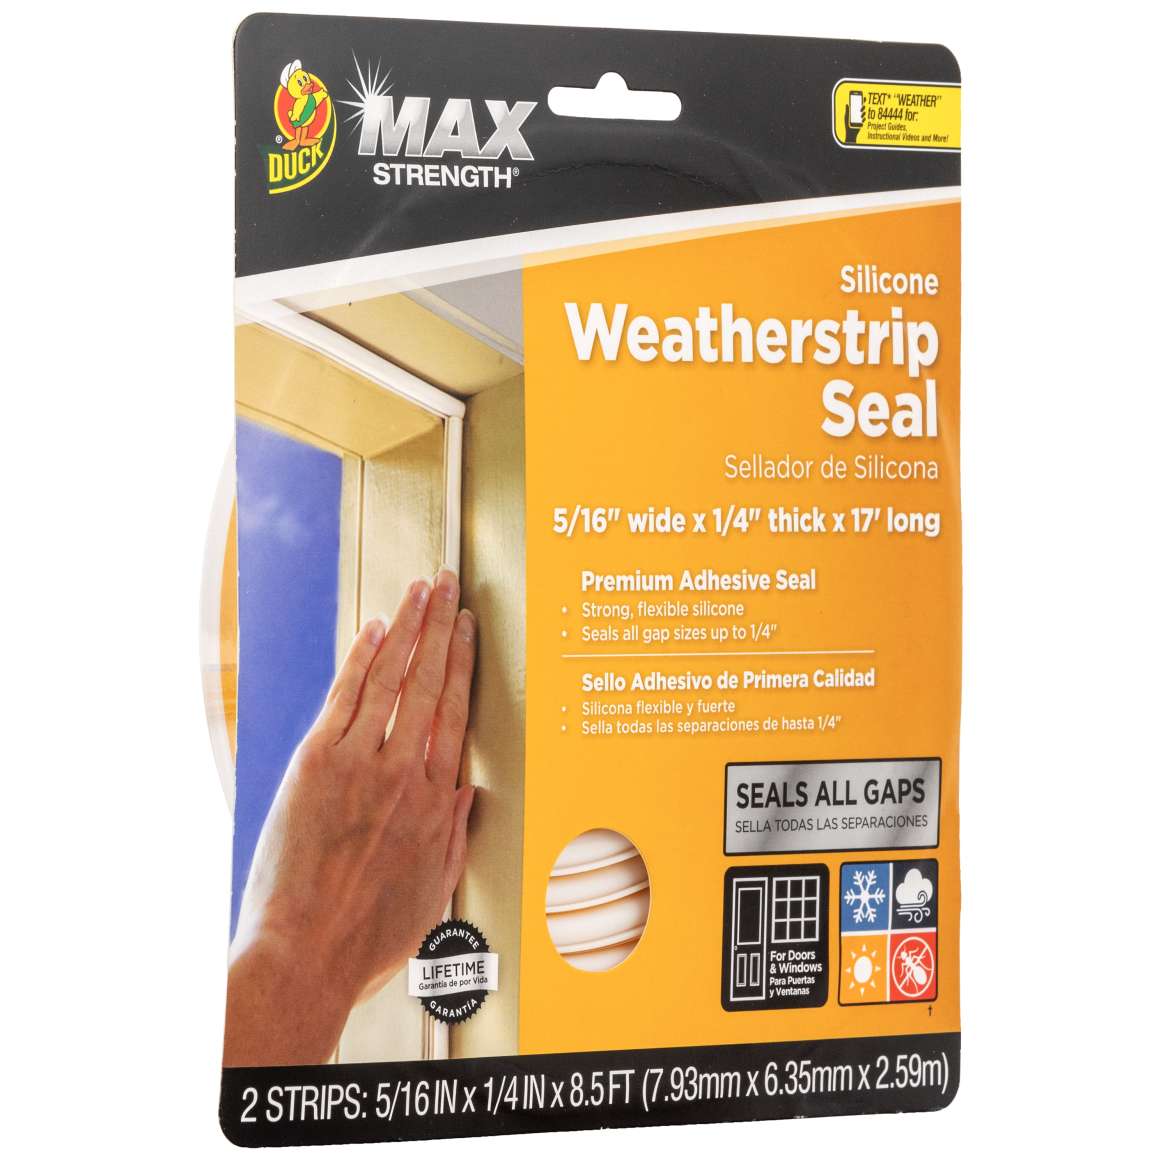 Max Strength Silicone Weatherstrip Seal